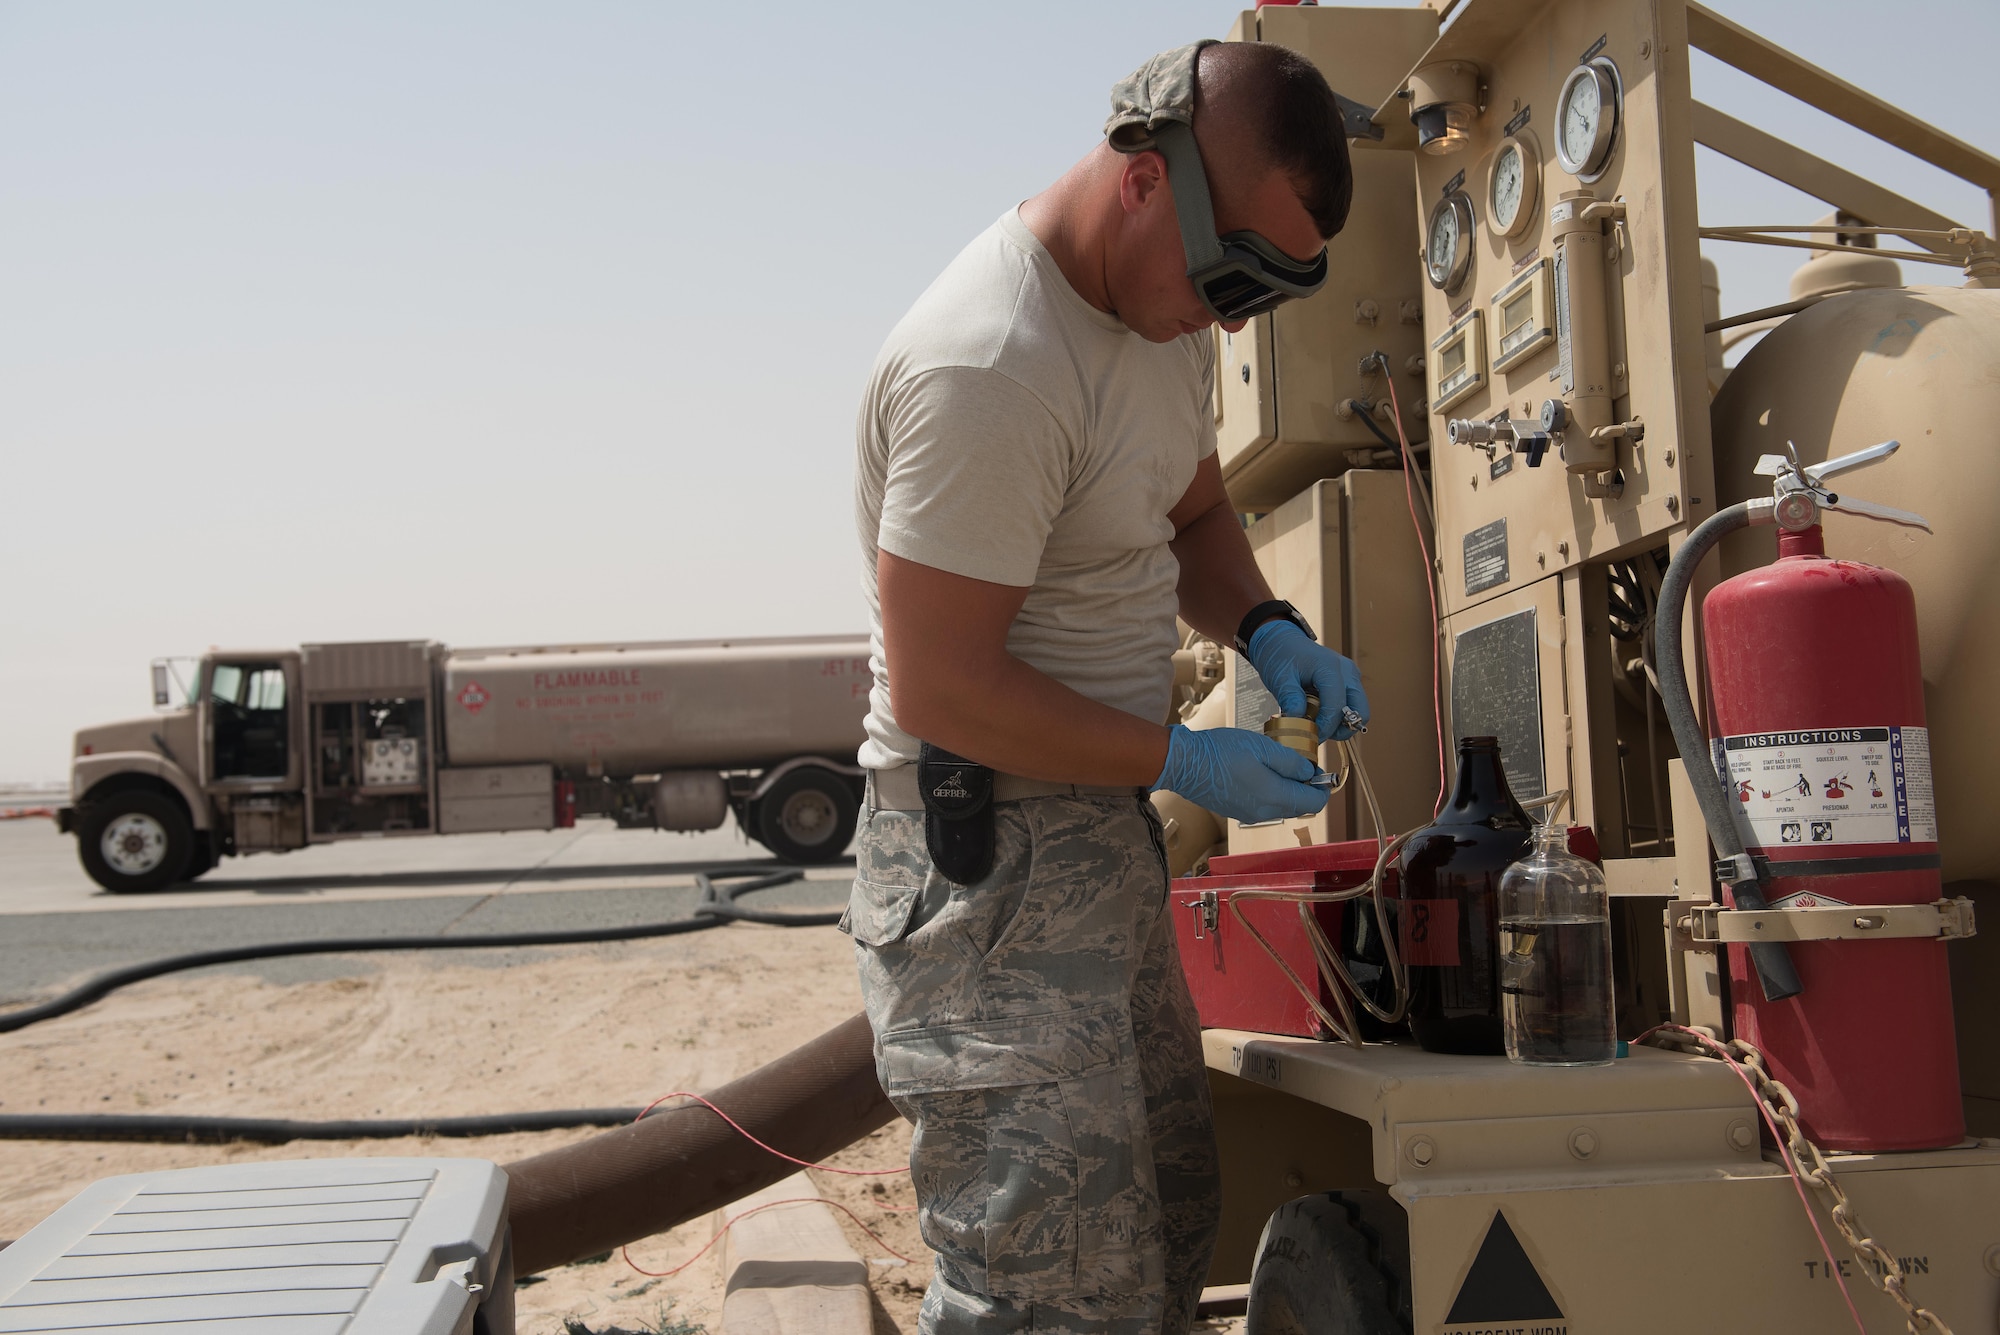 o ensure that all the installation’s fuel quality is kept up to industry standards, Staff Sgt. Boyle conducts daily quality assurance tests for water, solids and additives in the fuel.